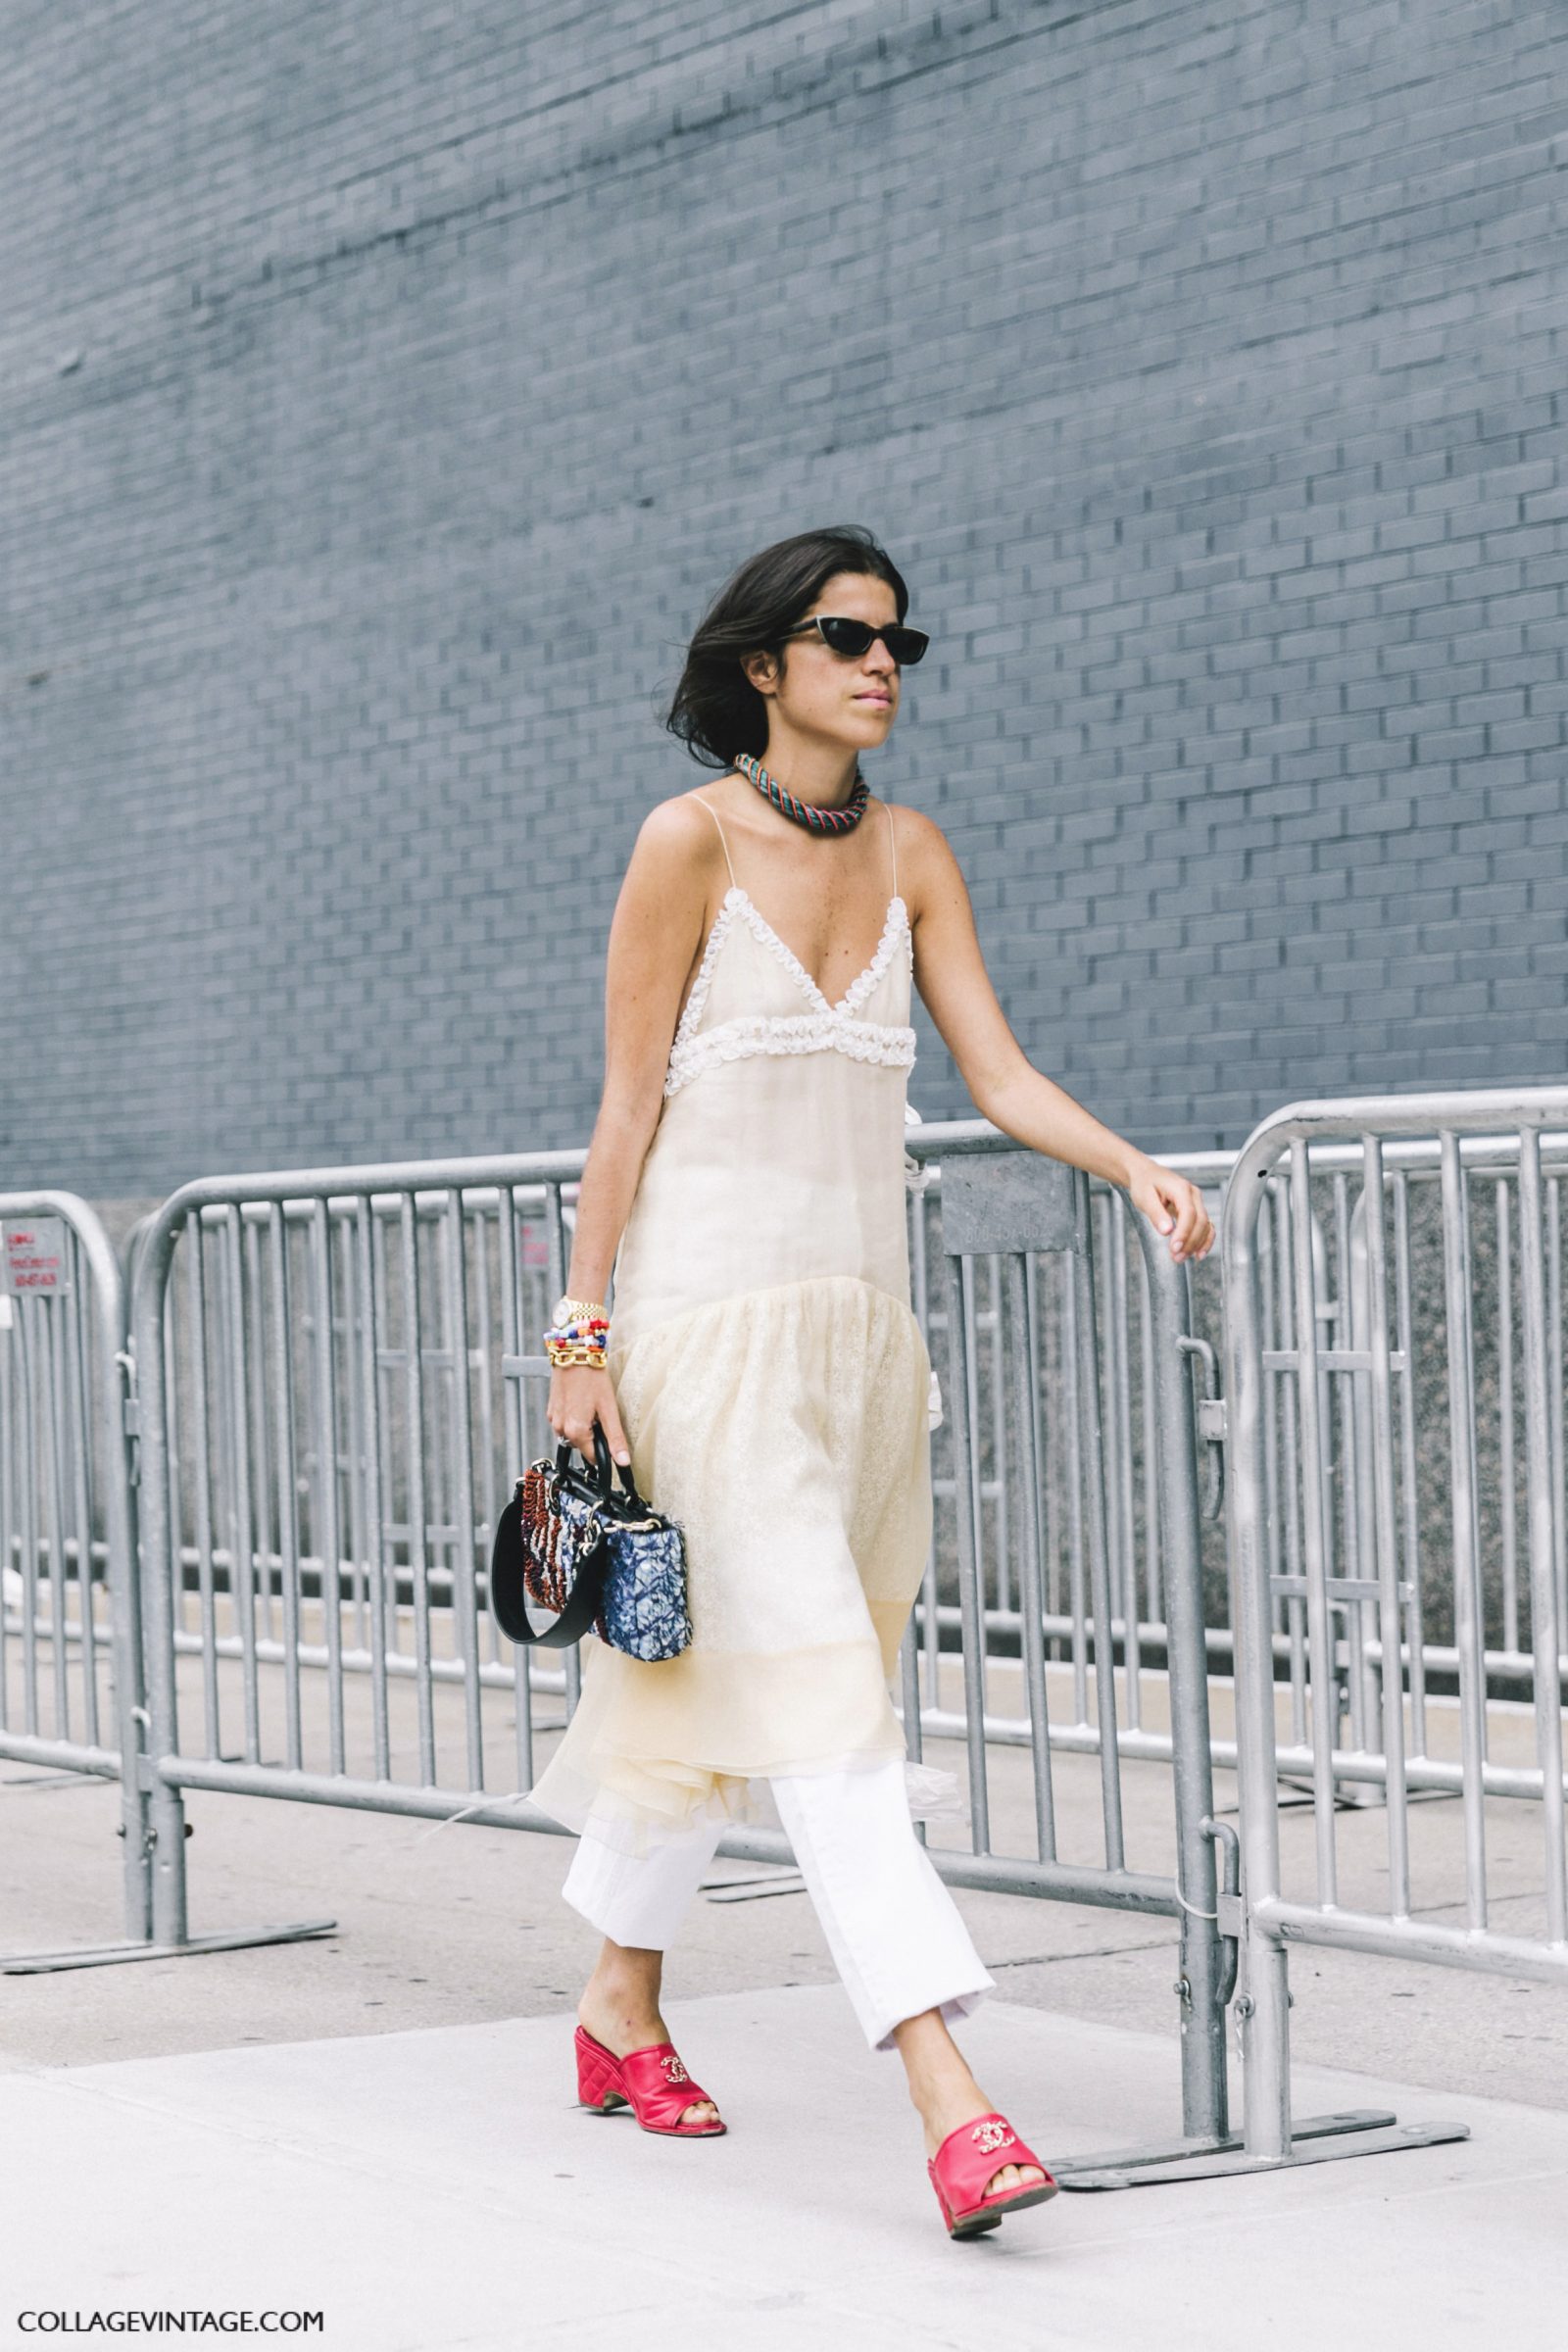 nyfw-new_york_fashion_week_ss17-street_style-outfits-collage_vintage-leandra_medine-man_repeller-dress_over_trousers-chanel_red_mules-lingerie_dress-4